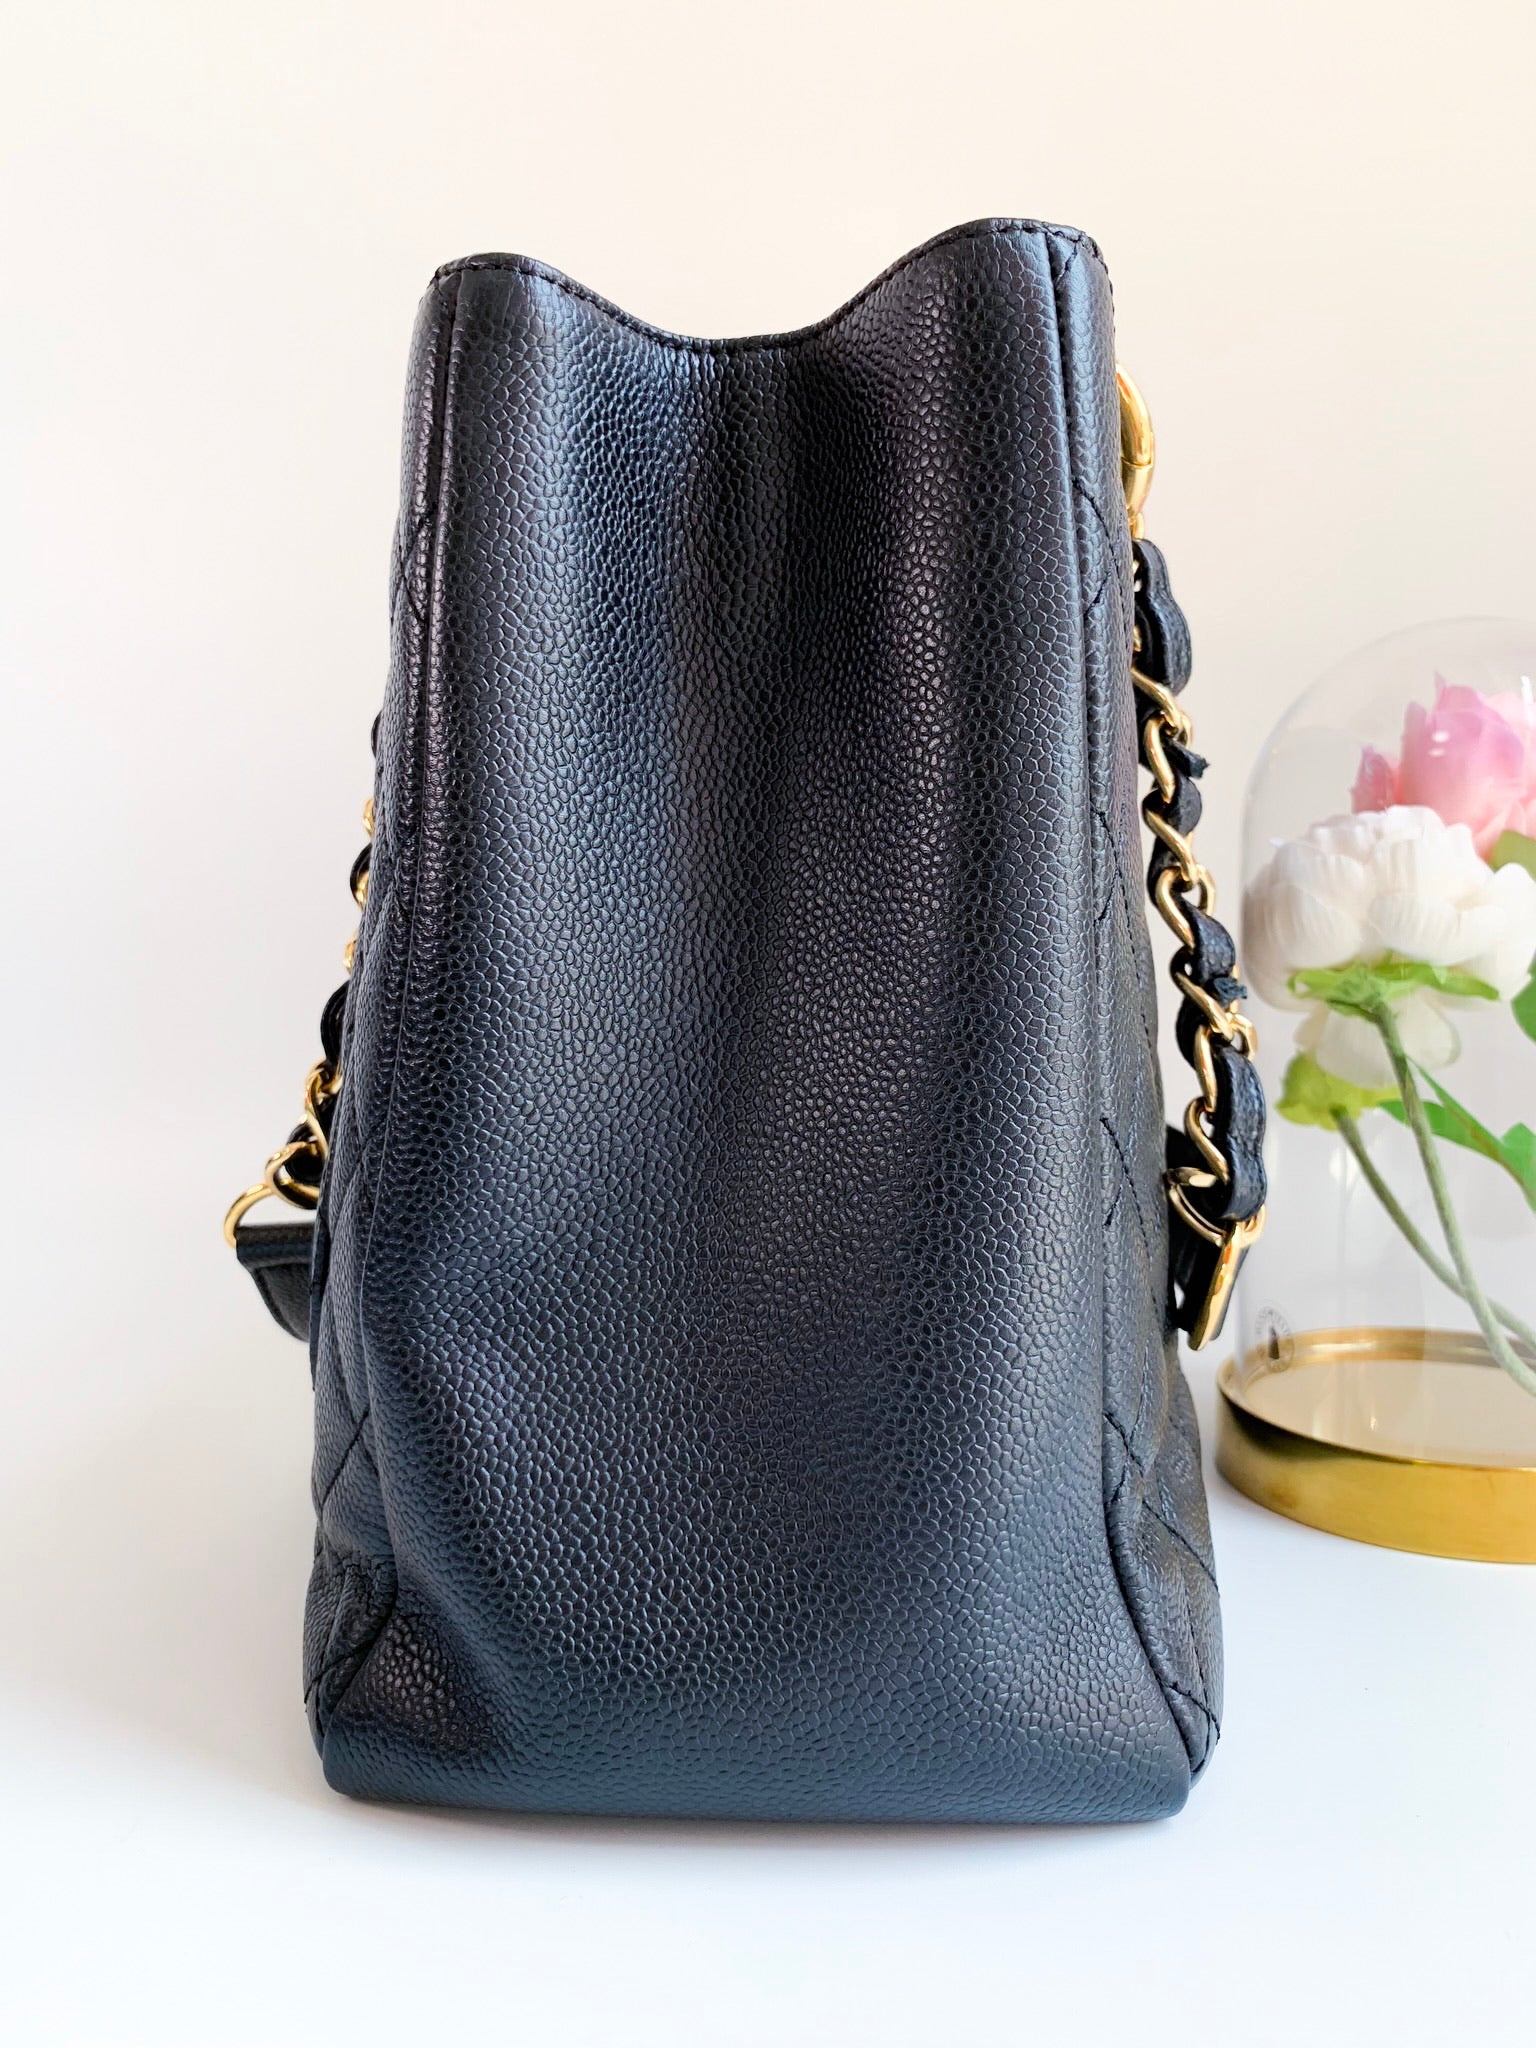 Chanel Petite Shopping Tote - Dress Raleigh Consignment